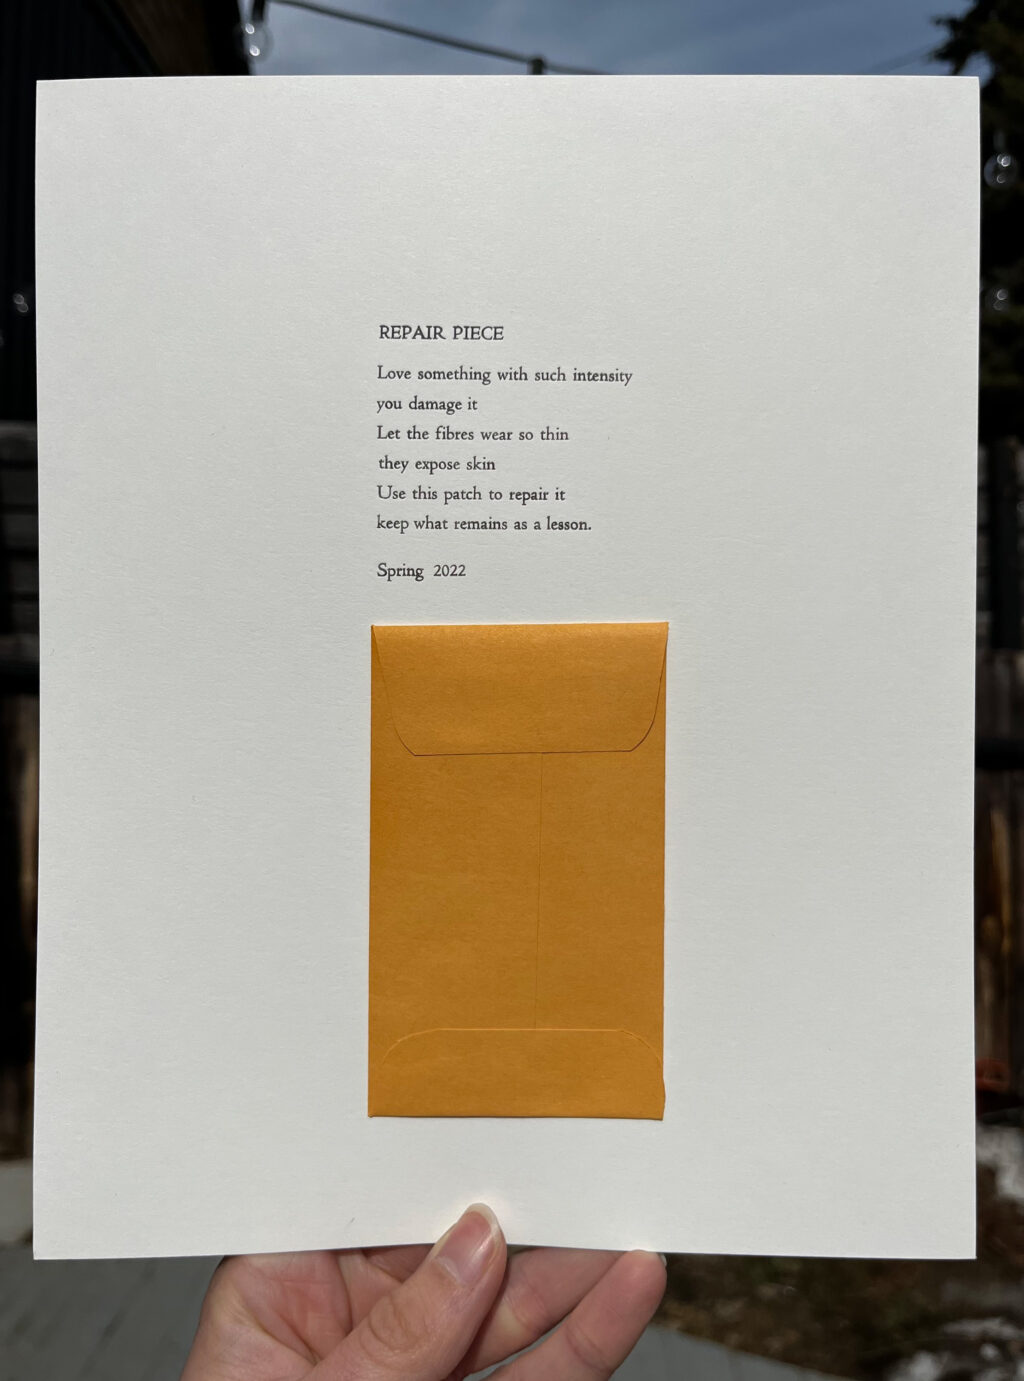 A hand holding a letterpress print, printed with a poem that reads: "REPAIR PIECE. Love Something with such intensity that you damage it. Let the fibres wear so thin they expose skin. Use this patch to repair it. keep what remains a lesson. Spring 2022" The poem is followed by a small manila envelope glued onto the paper.